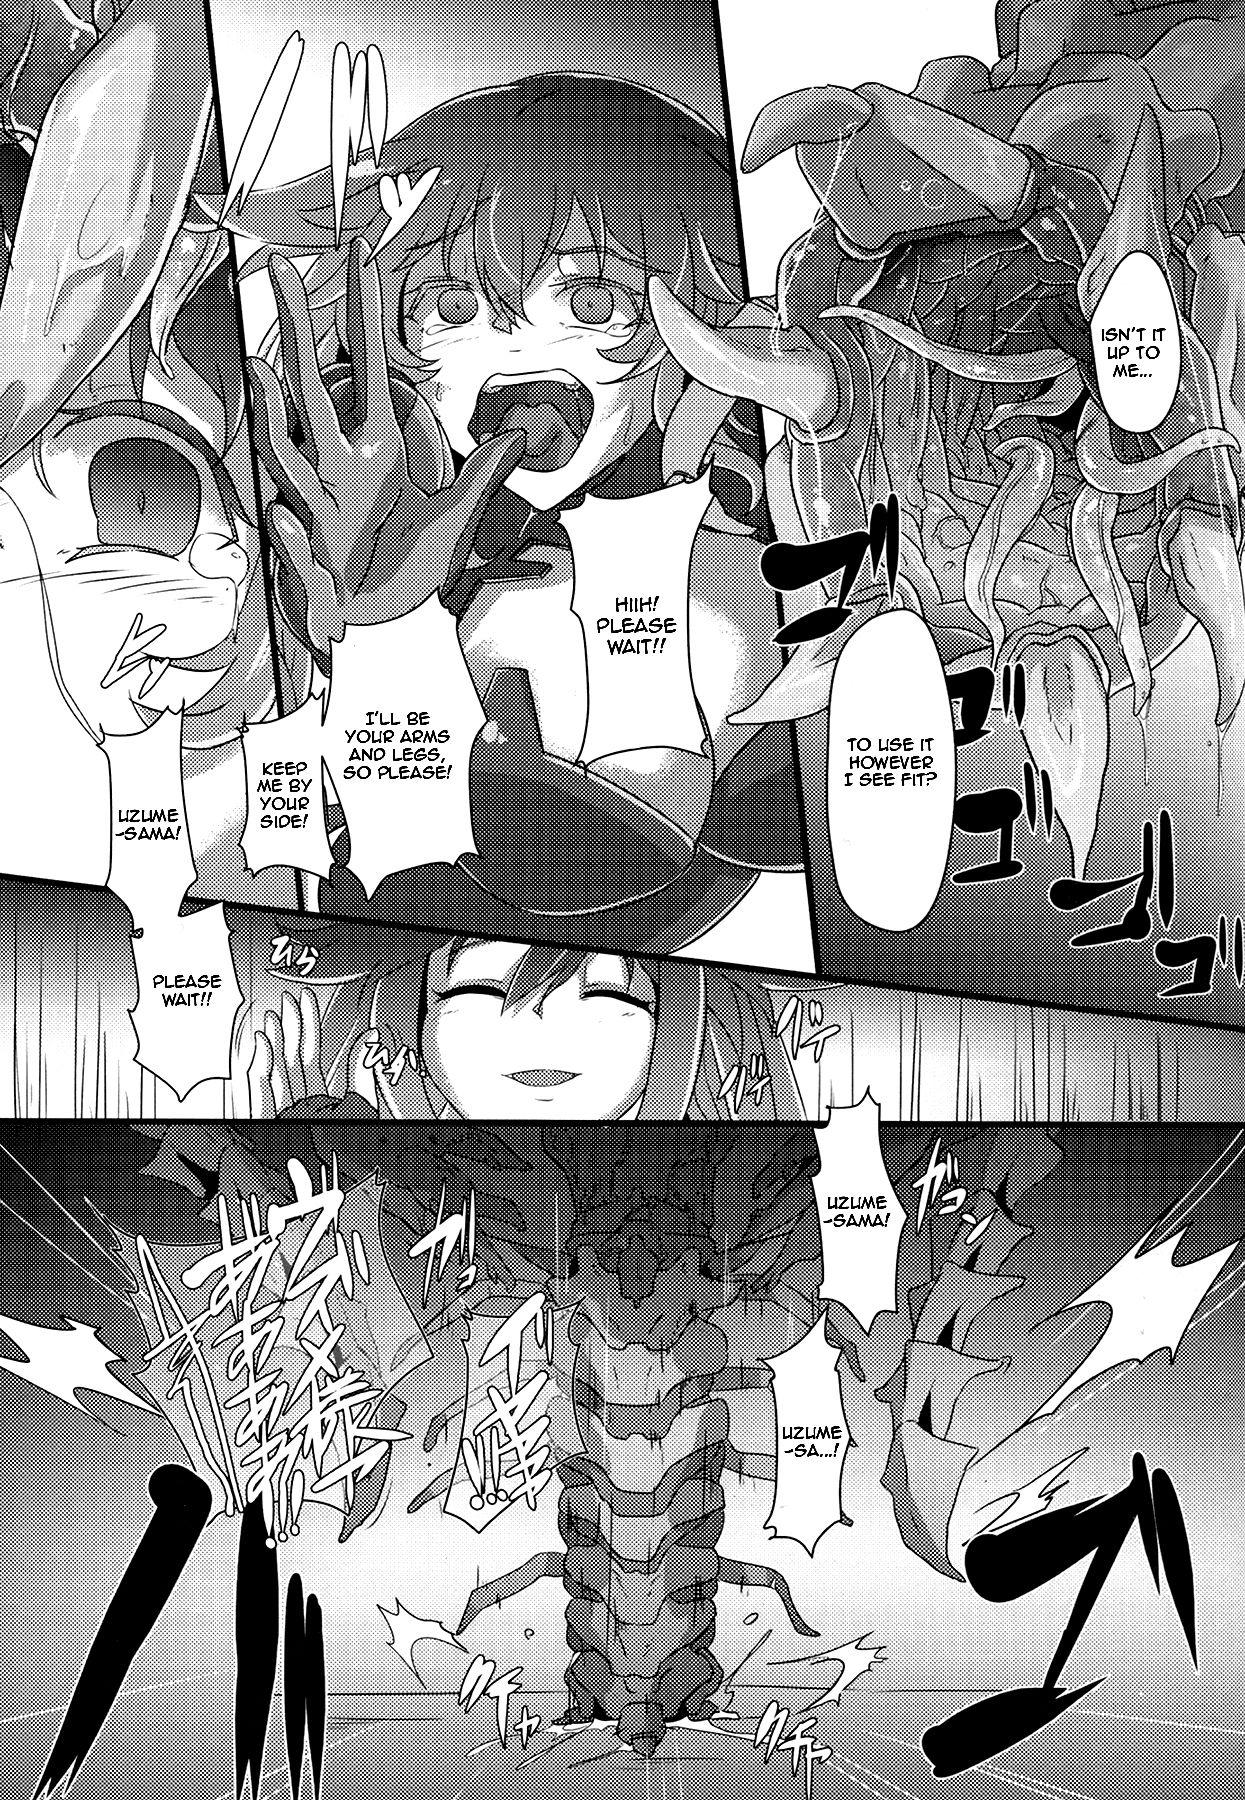 Mexico After the Nightmare - Hyperdimension neptunia 3way - Page 9